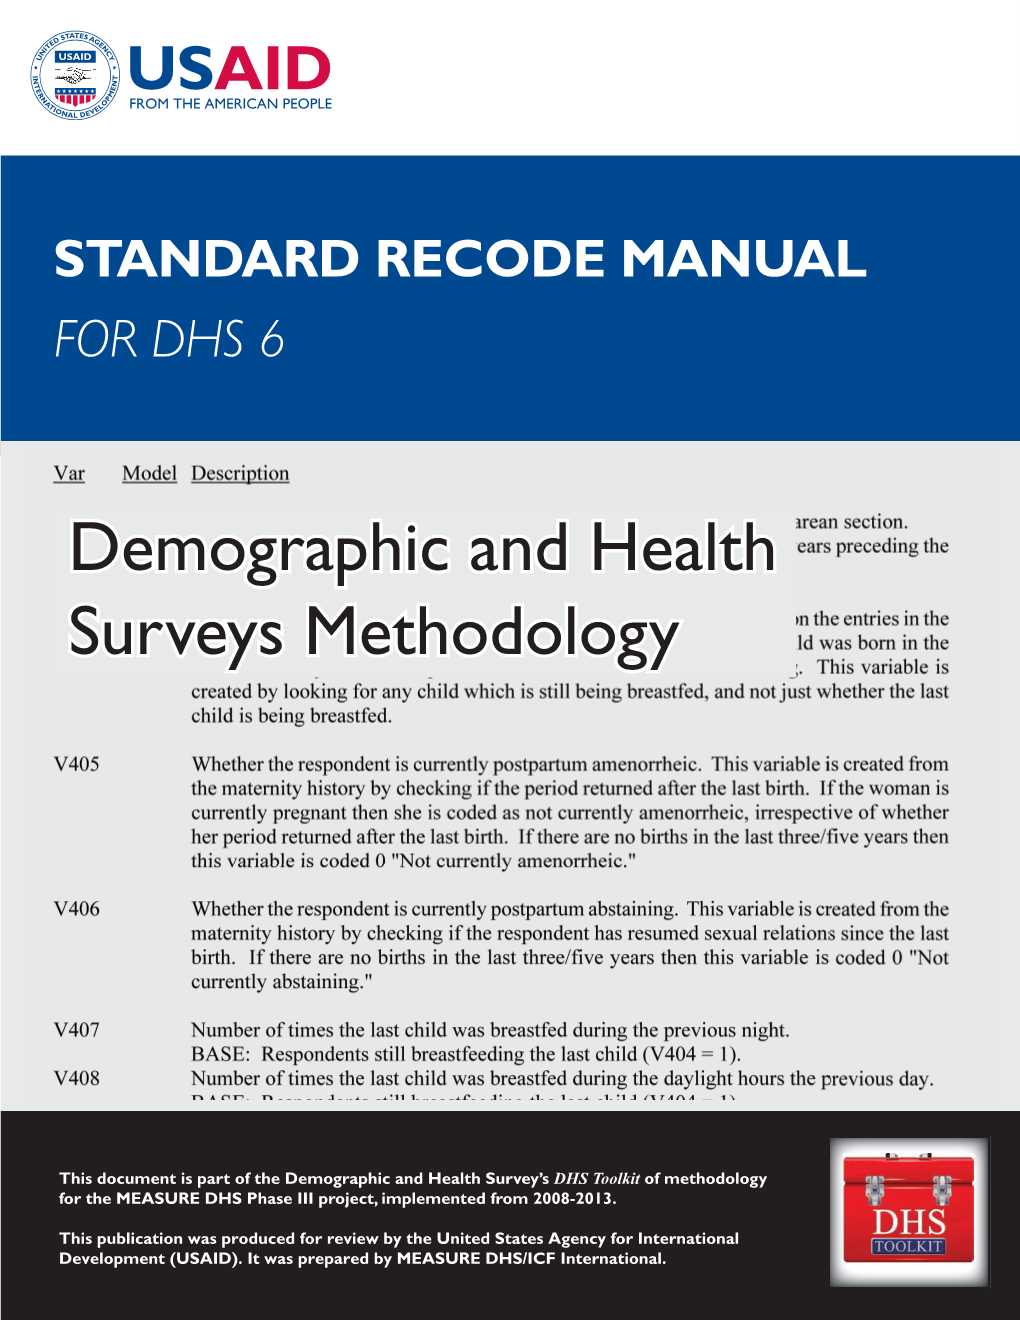 Standard Recode Manual for DHS 6